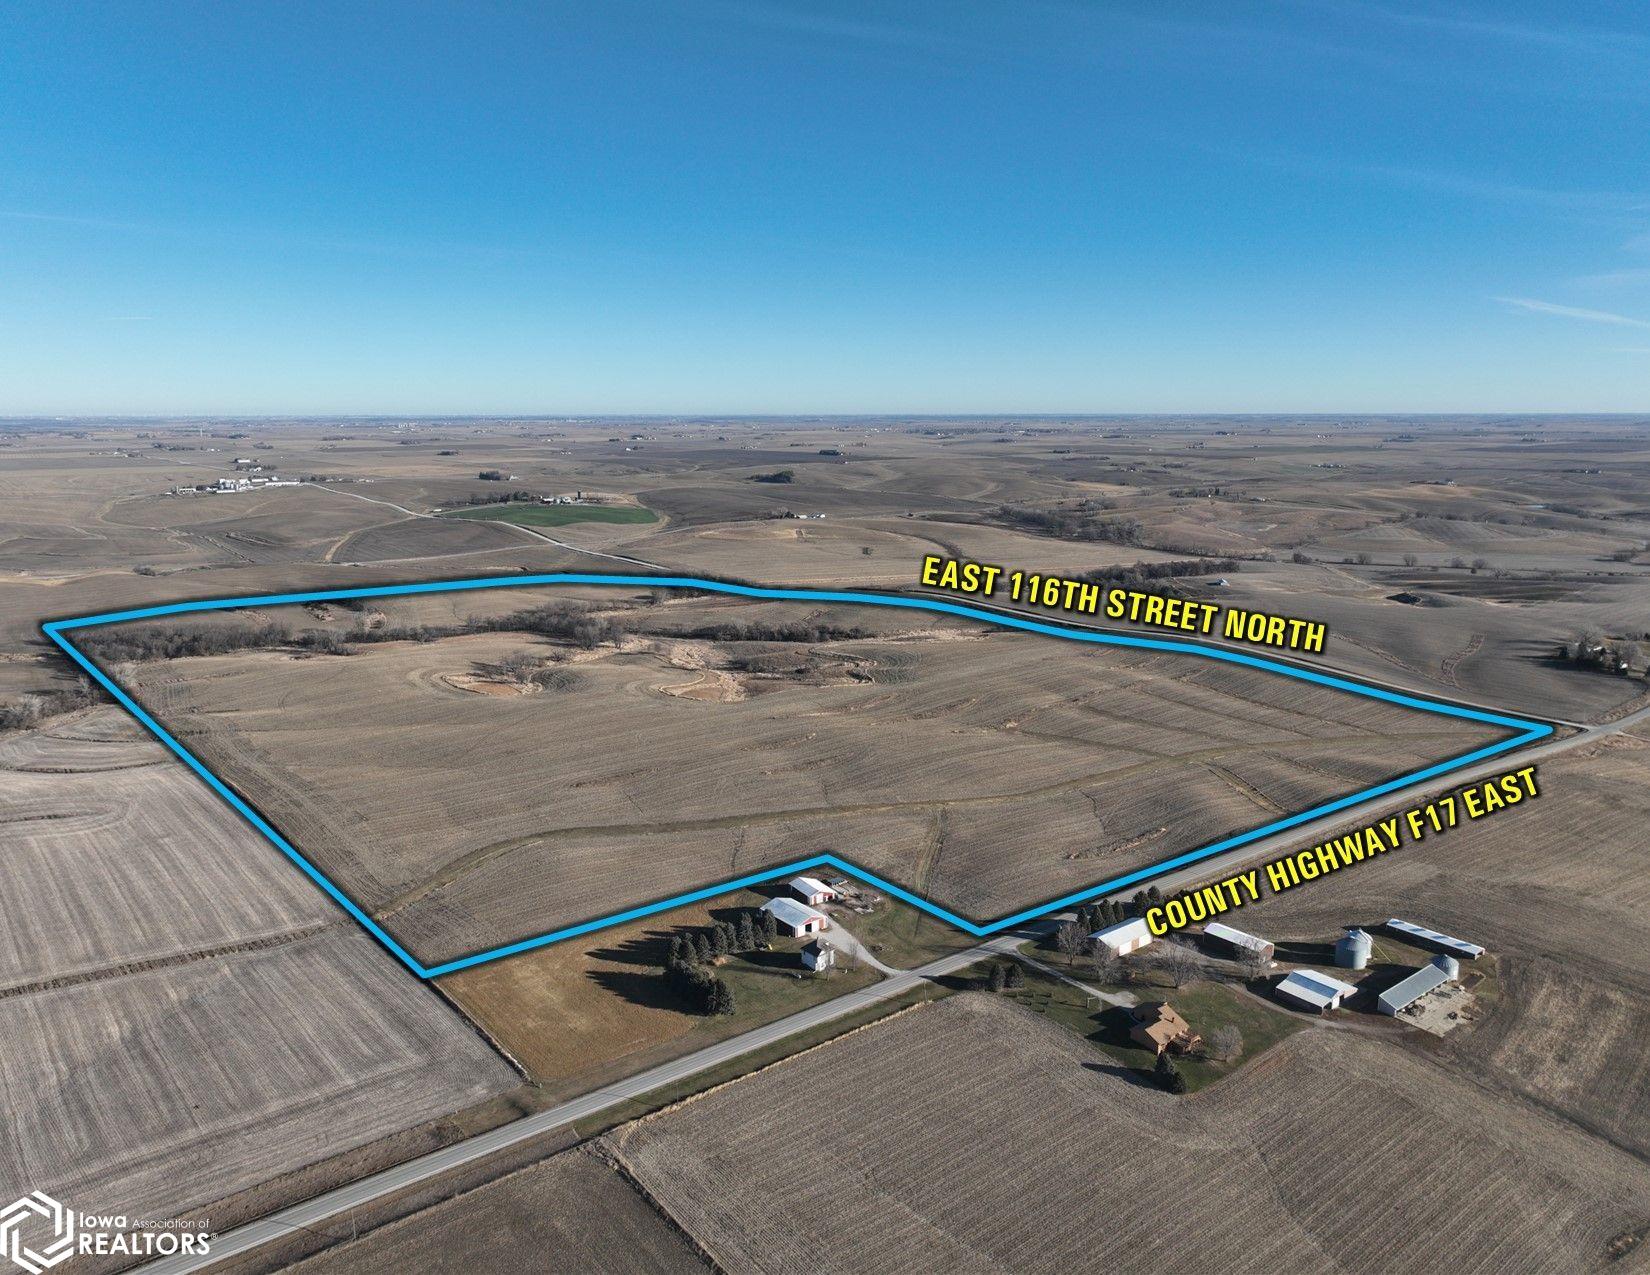 Highway F17 East, Grinnell, Iowa 50112, ,Farm,For Sale,Highway F17 East,6314102